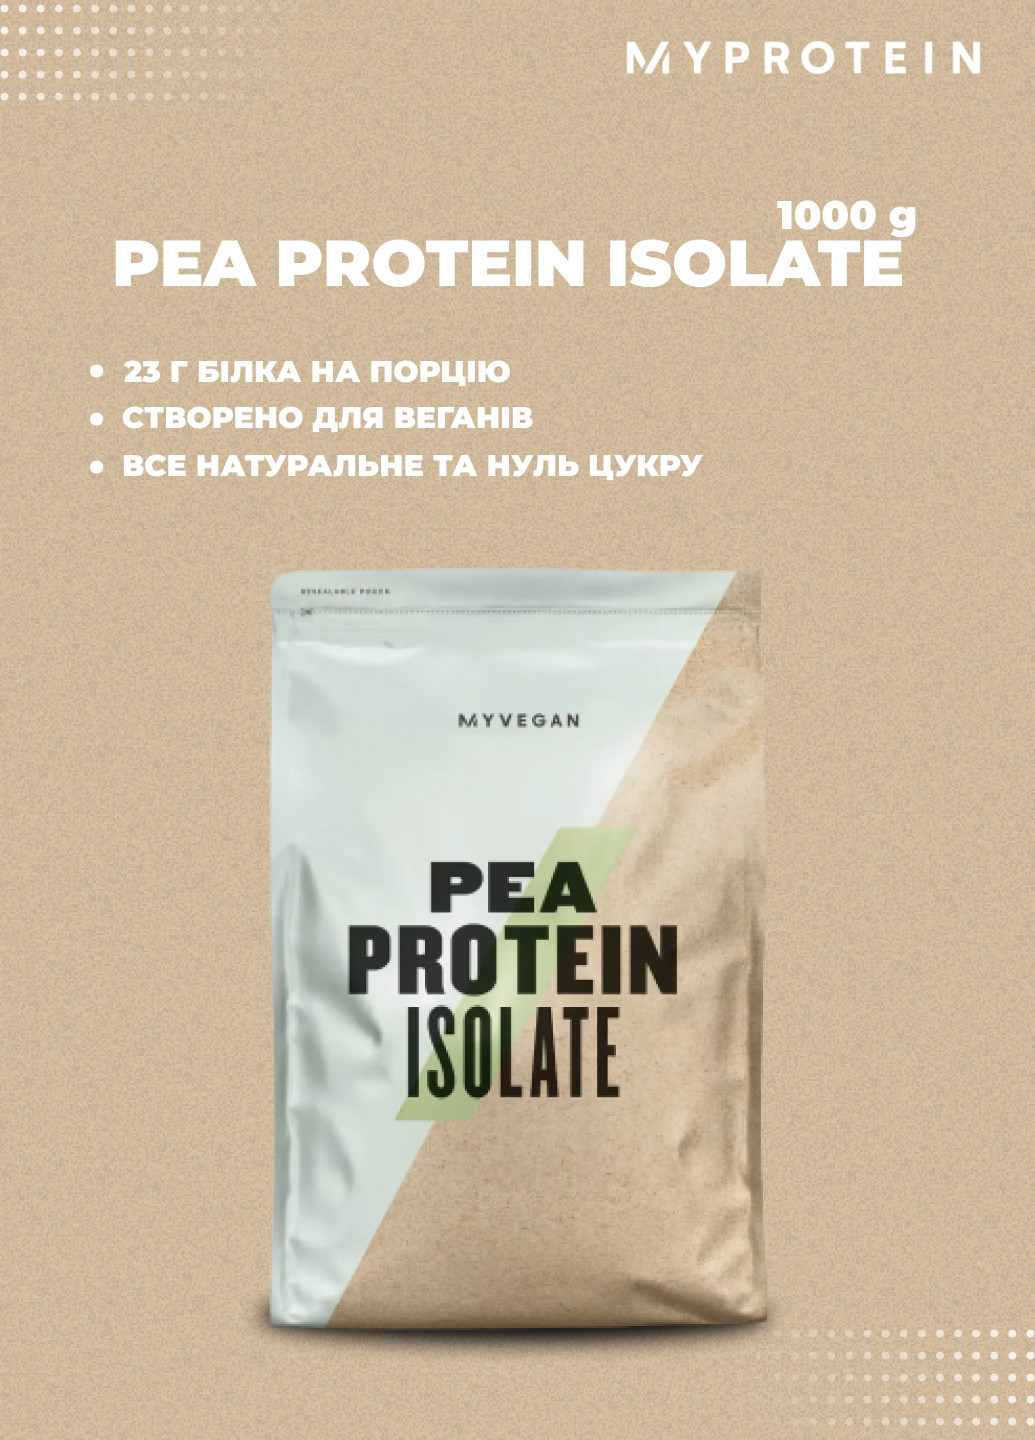 Протеин Pea Protein Isolate 1000g Natural My Protein (252446664)